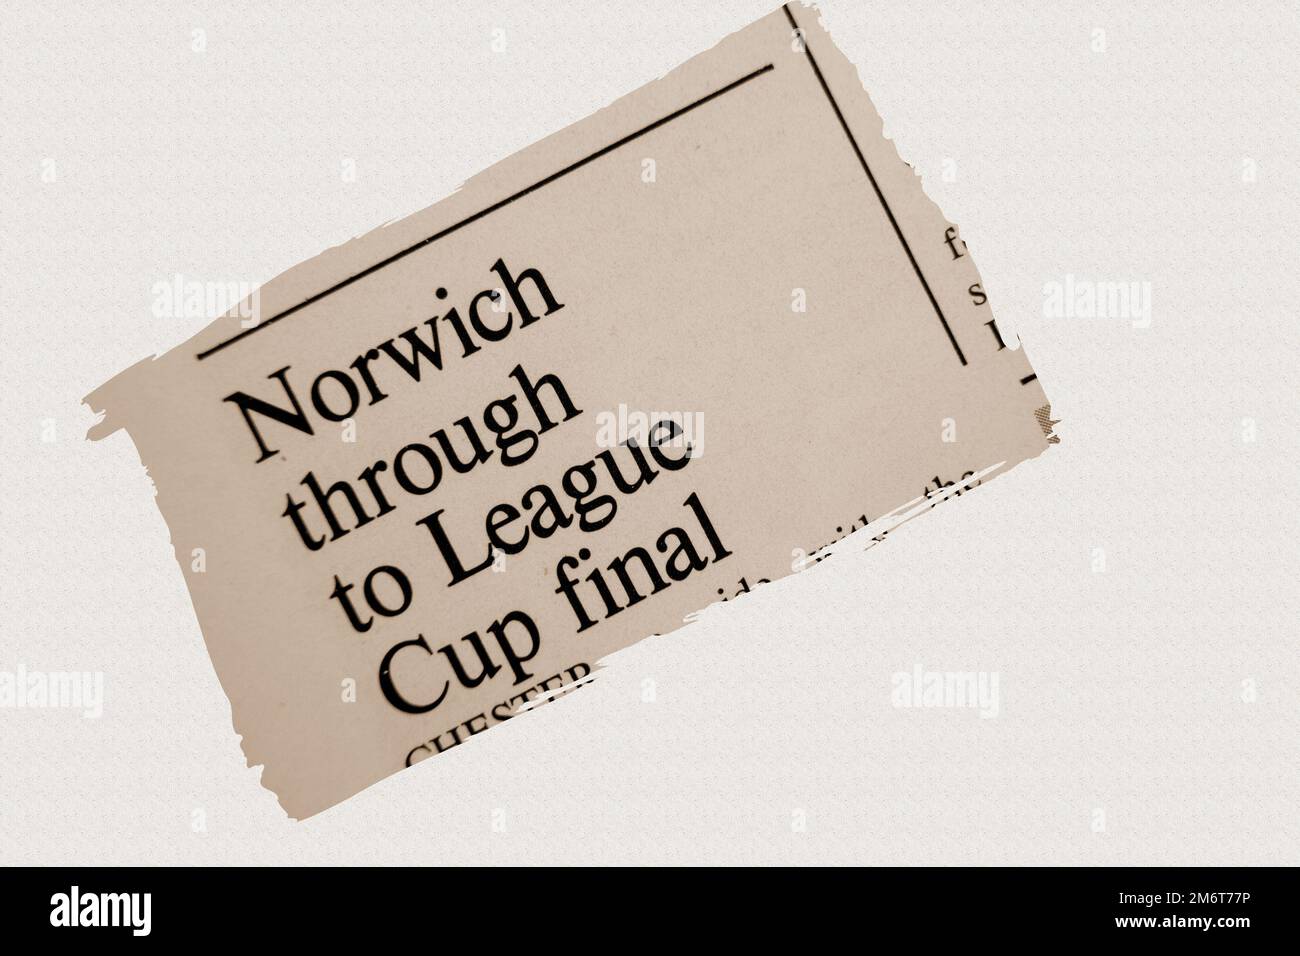 news story from 1975 newspaper headline article title - Norwich through to League Cup final - sepia Stock Photo